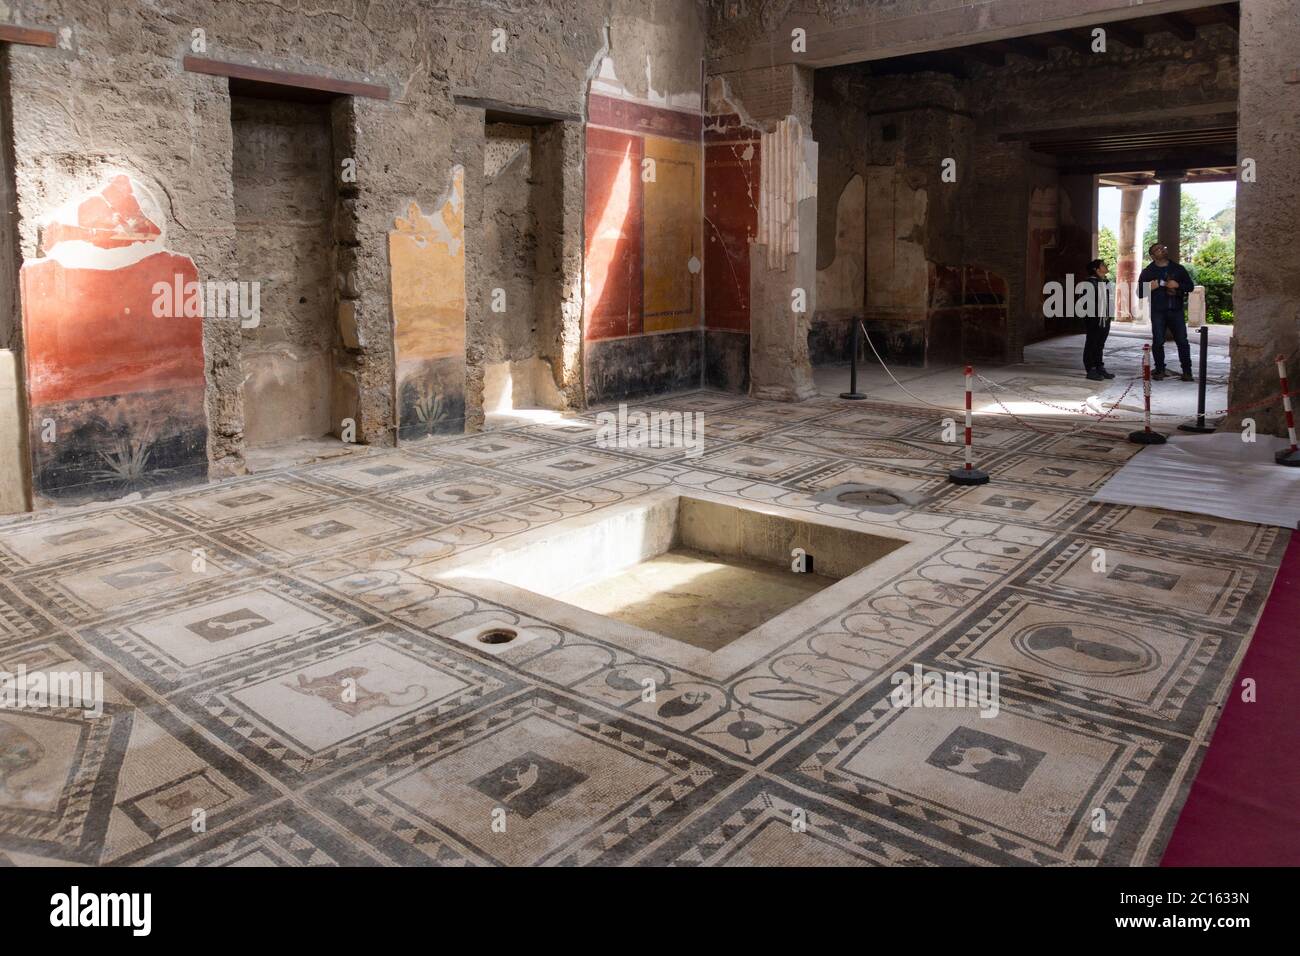 The house of Paquius Proculus with a magnificent mosaic tiled floor showing animals, in the ancient city of Pompeii, UNESCO World Heritage Site, Italy Stock Photo